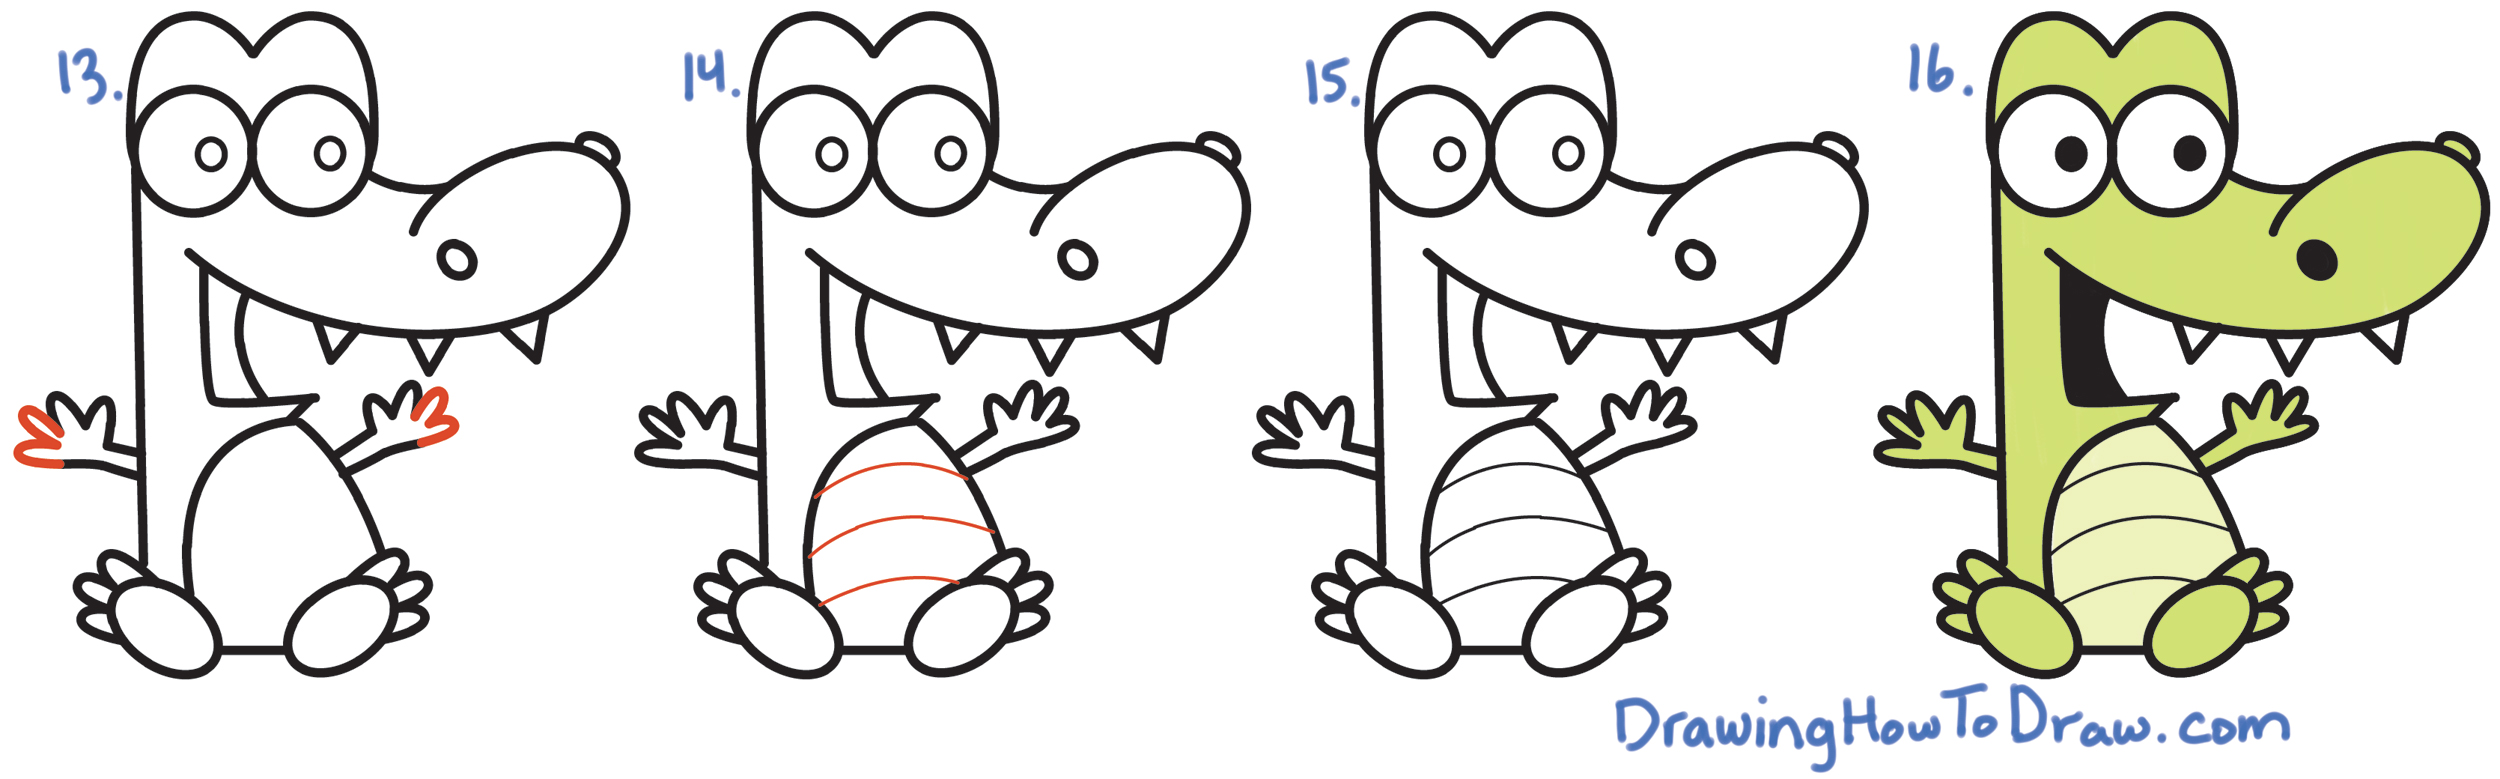 How to Draw a Cartoon Crocodile 8 Steps with Pictures  wikiHow